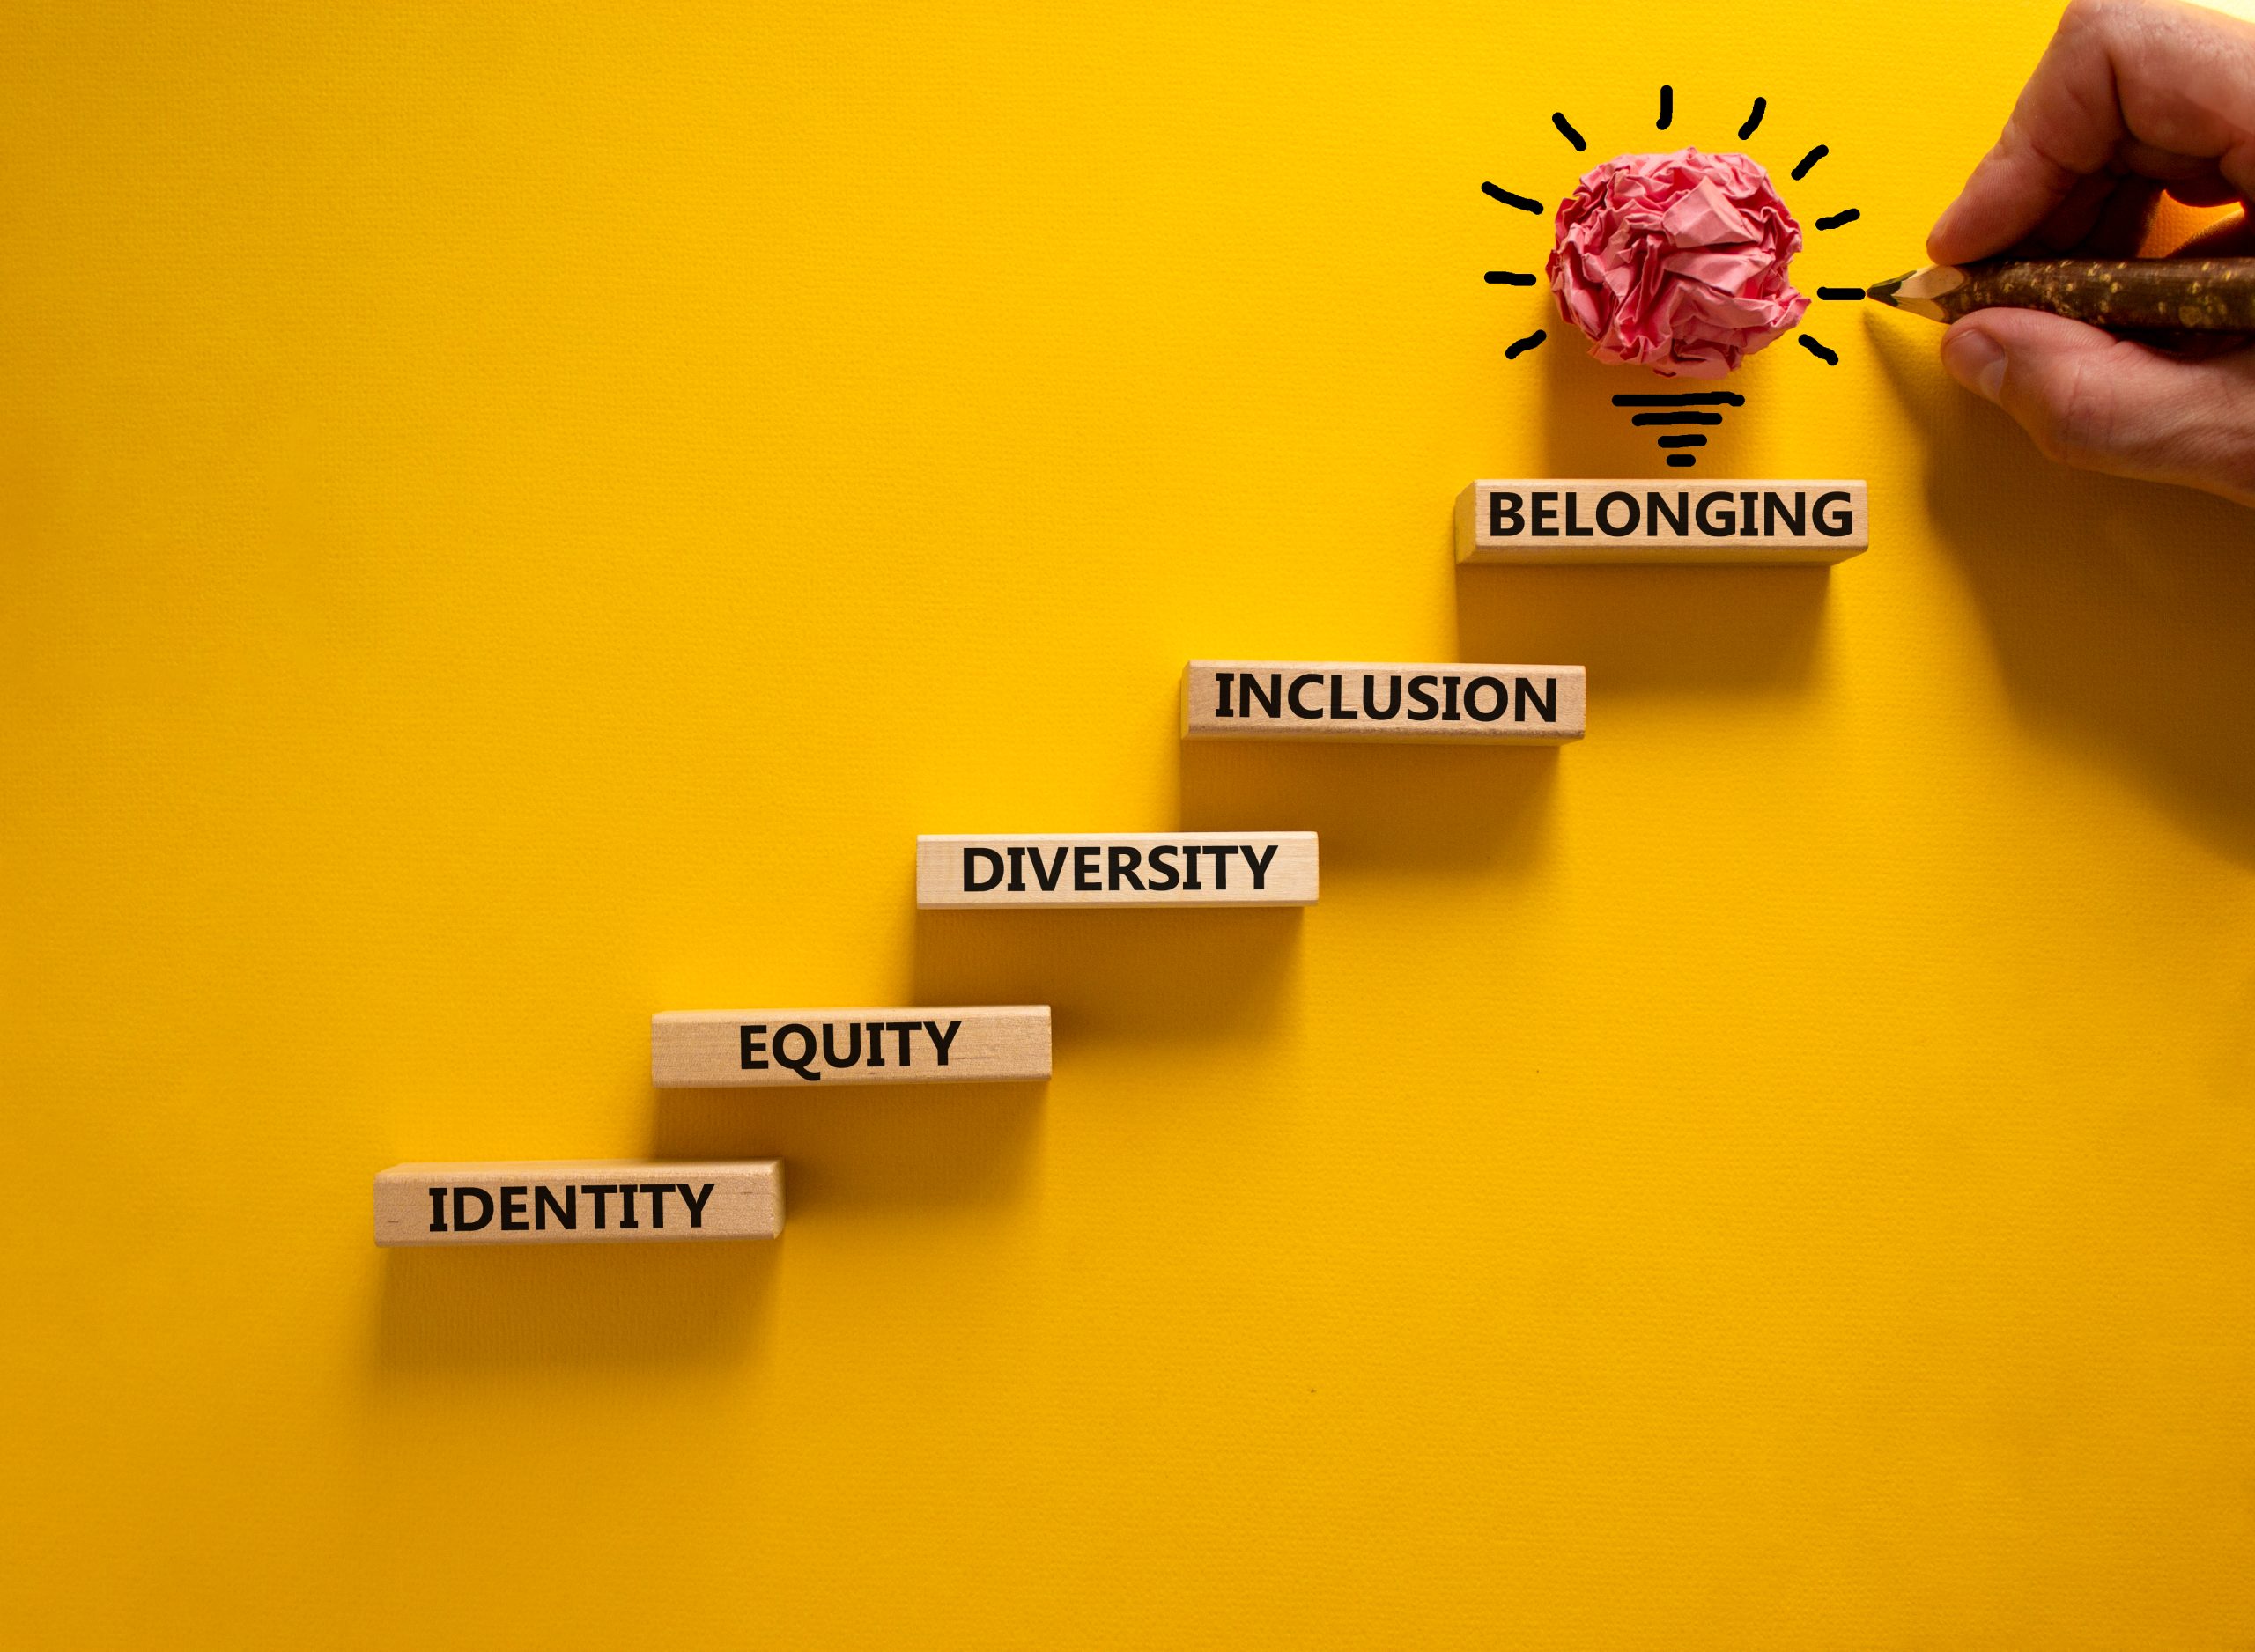 Equity and Belonging